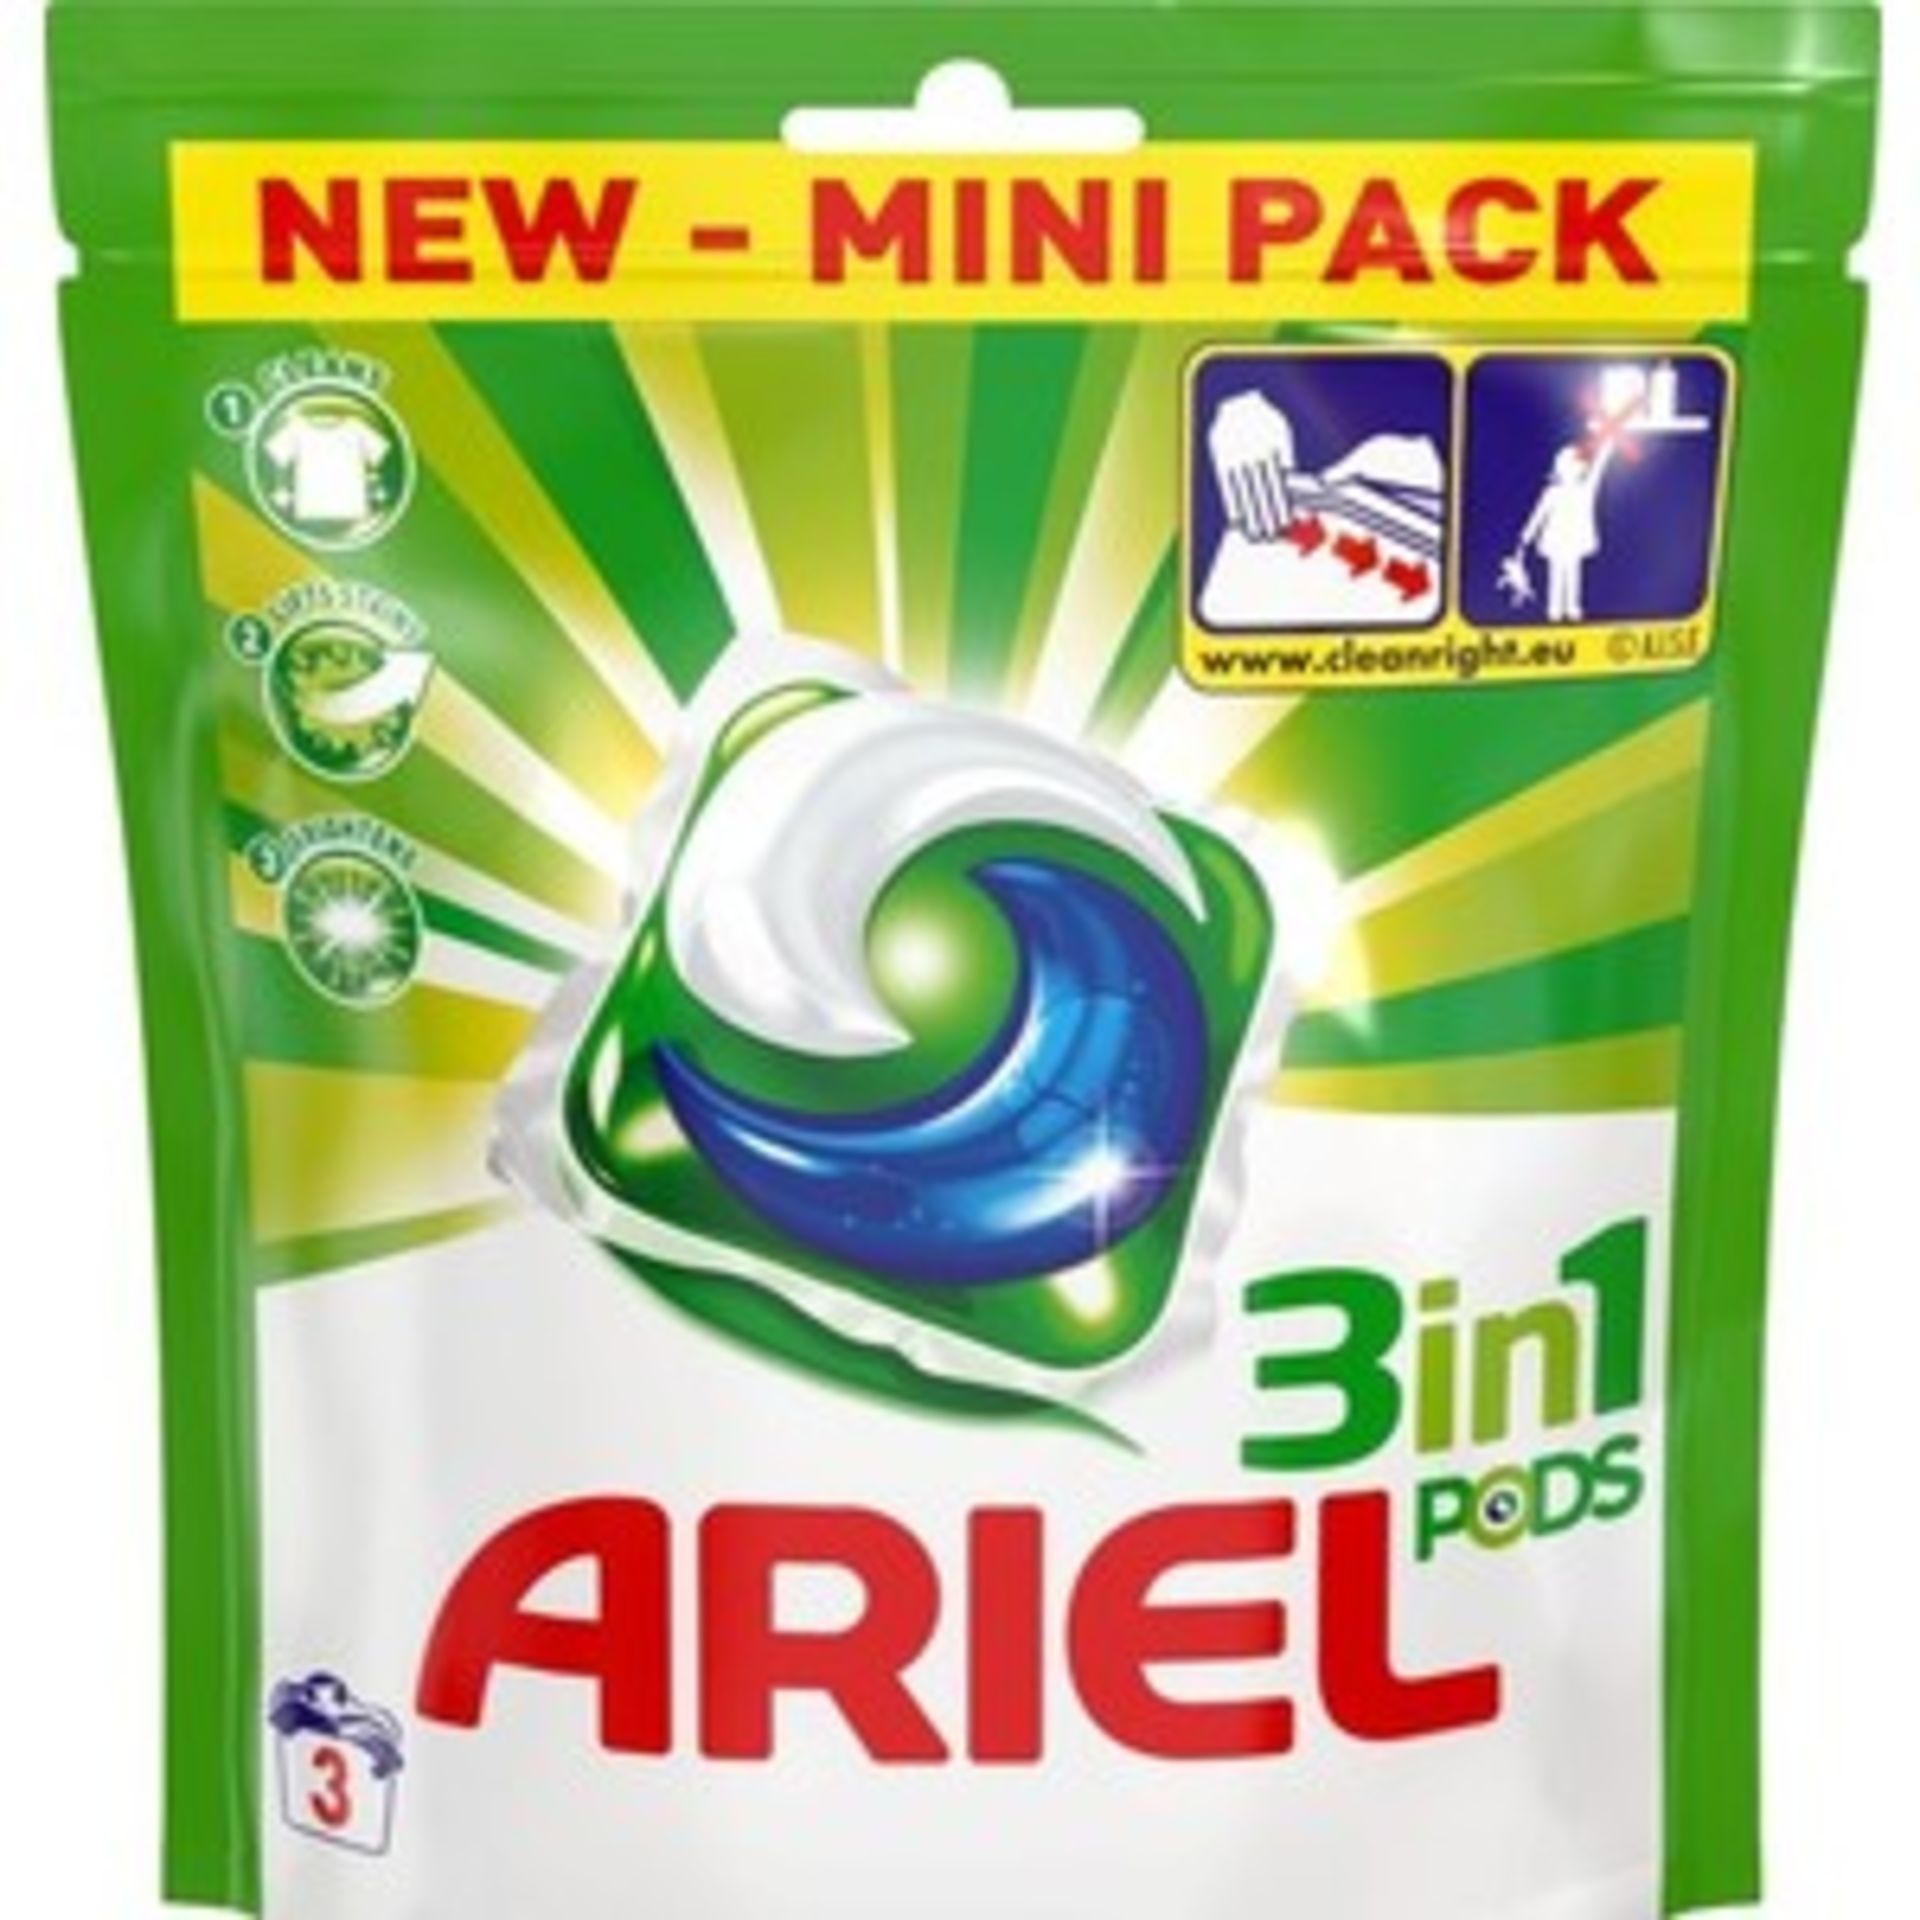 V *TRADE QTY* Brand New 12 Ariel 3-in-1 Pods Laundry Detergent X100 YOUR BID PRICE TO BE